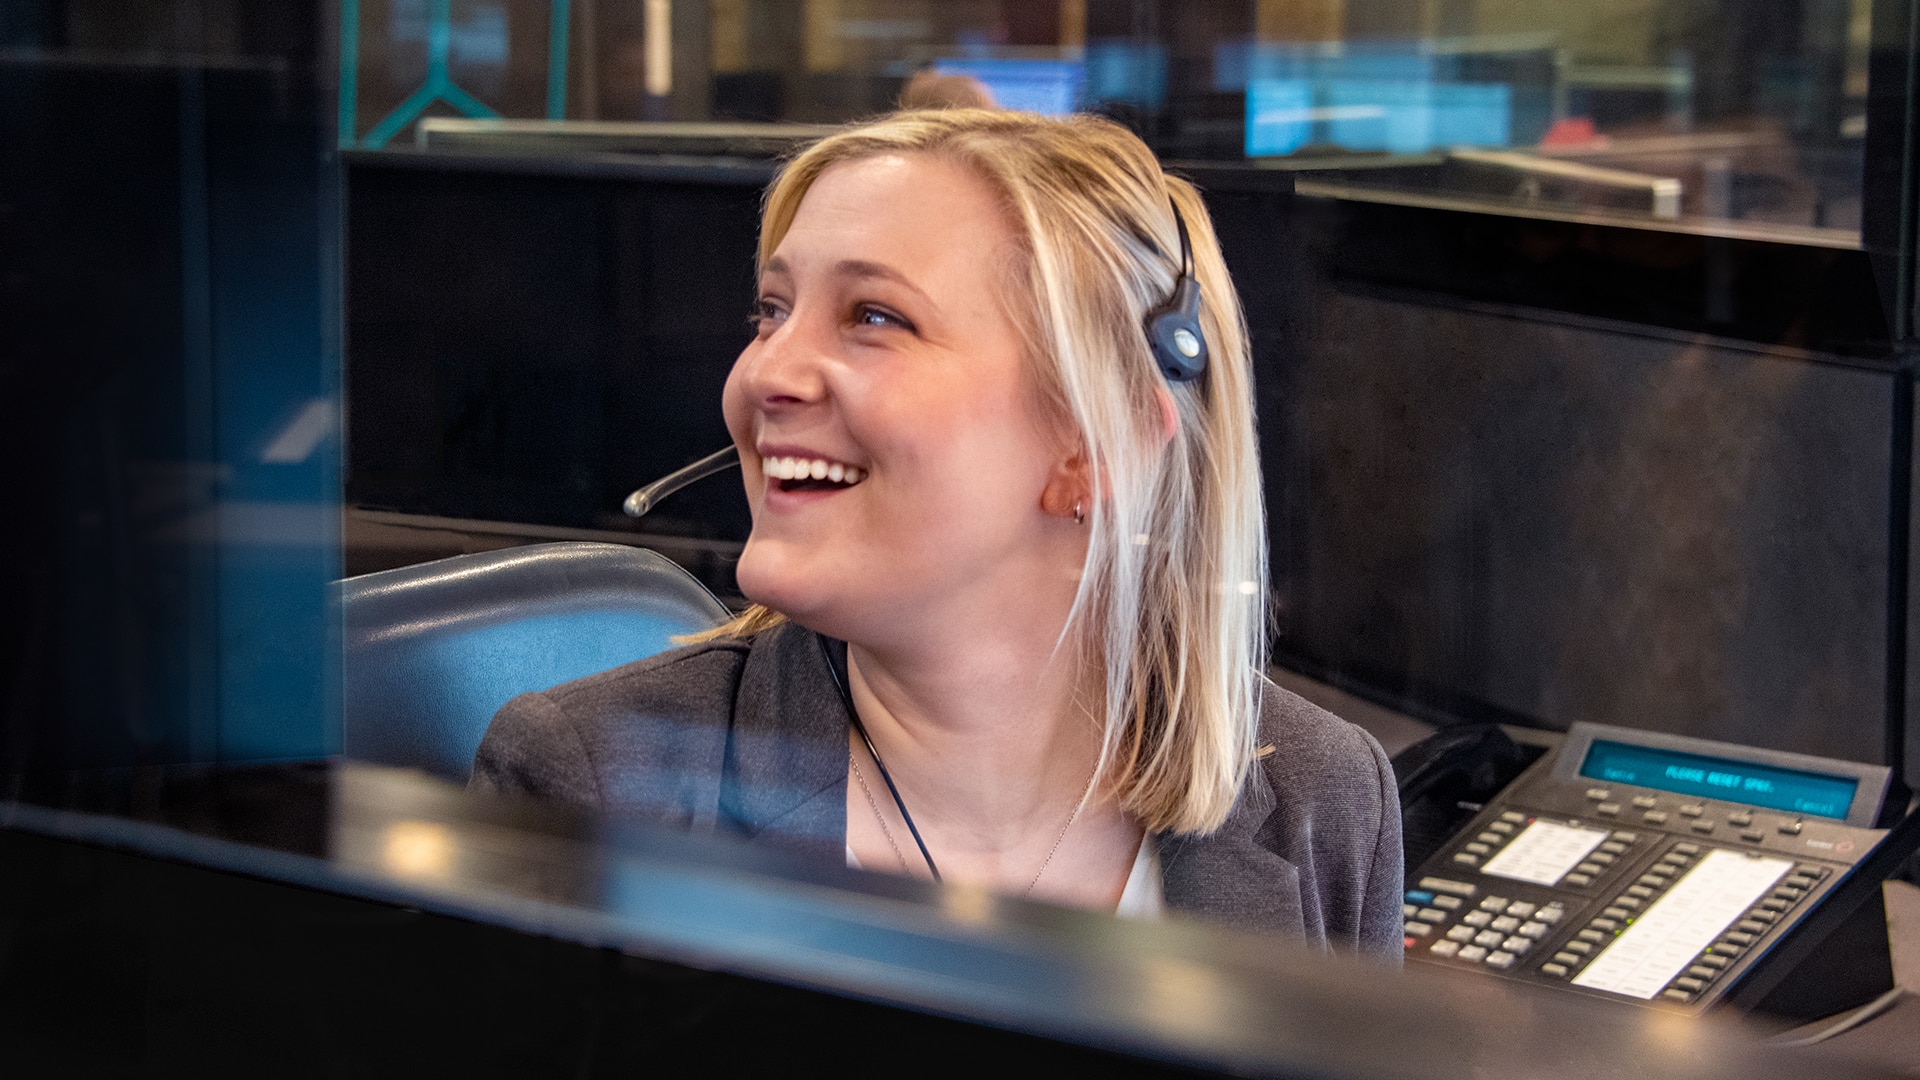 blonde lady smiling with headset on